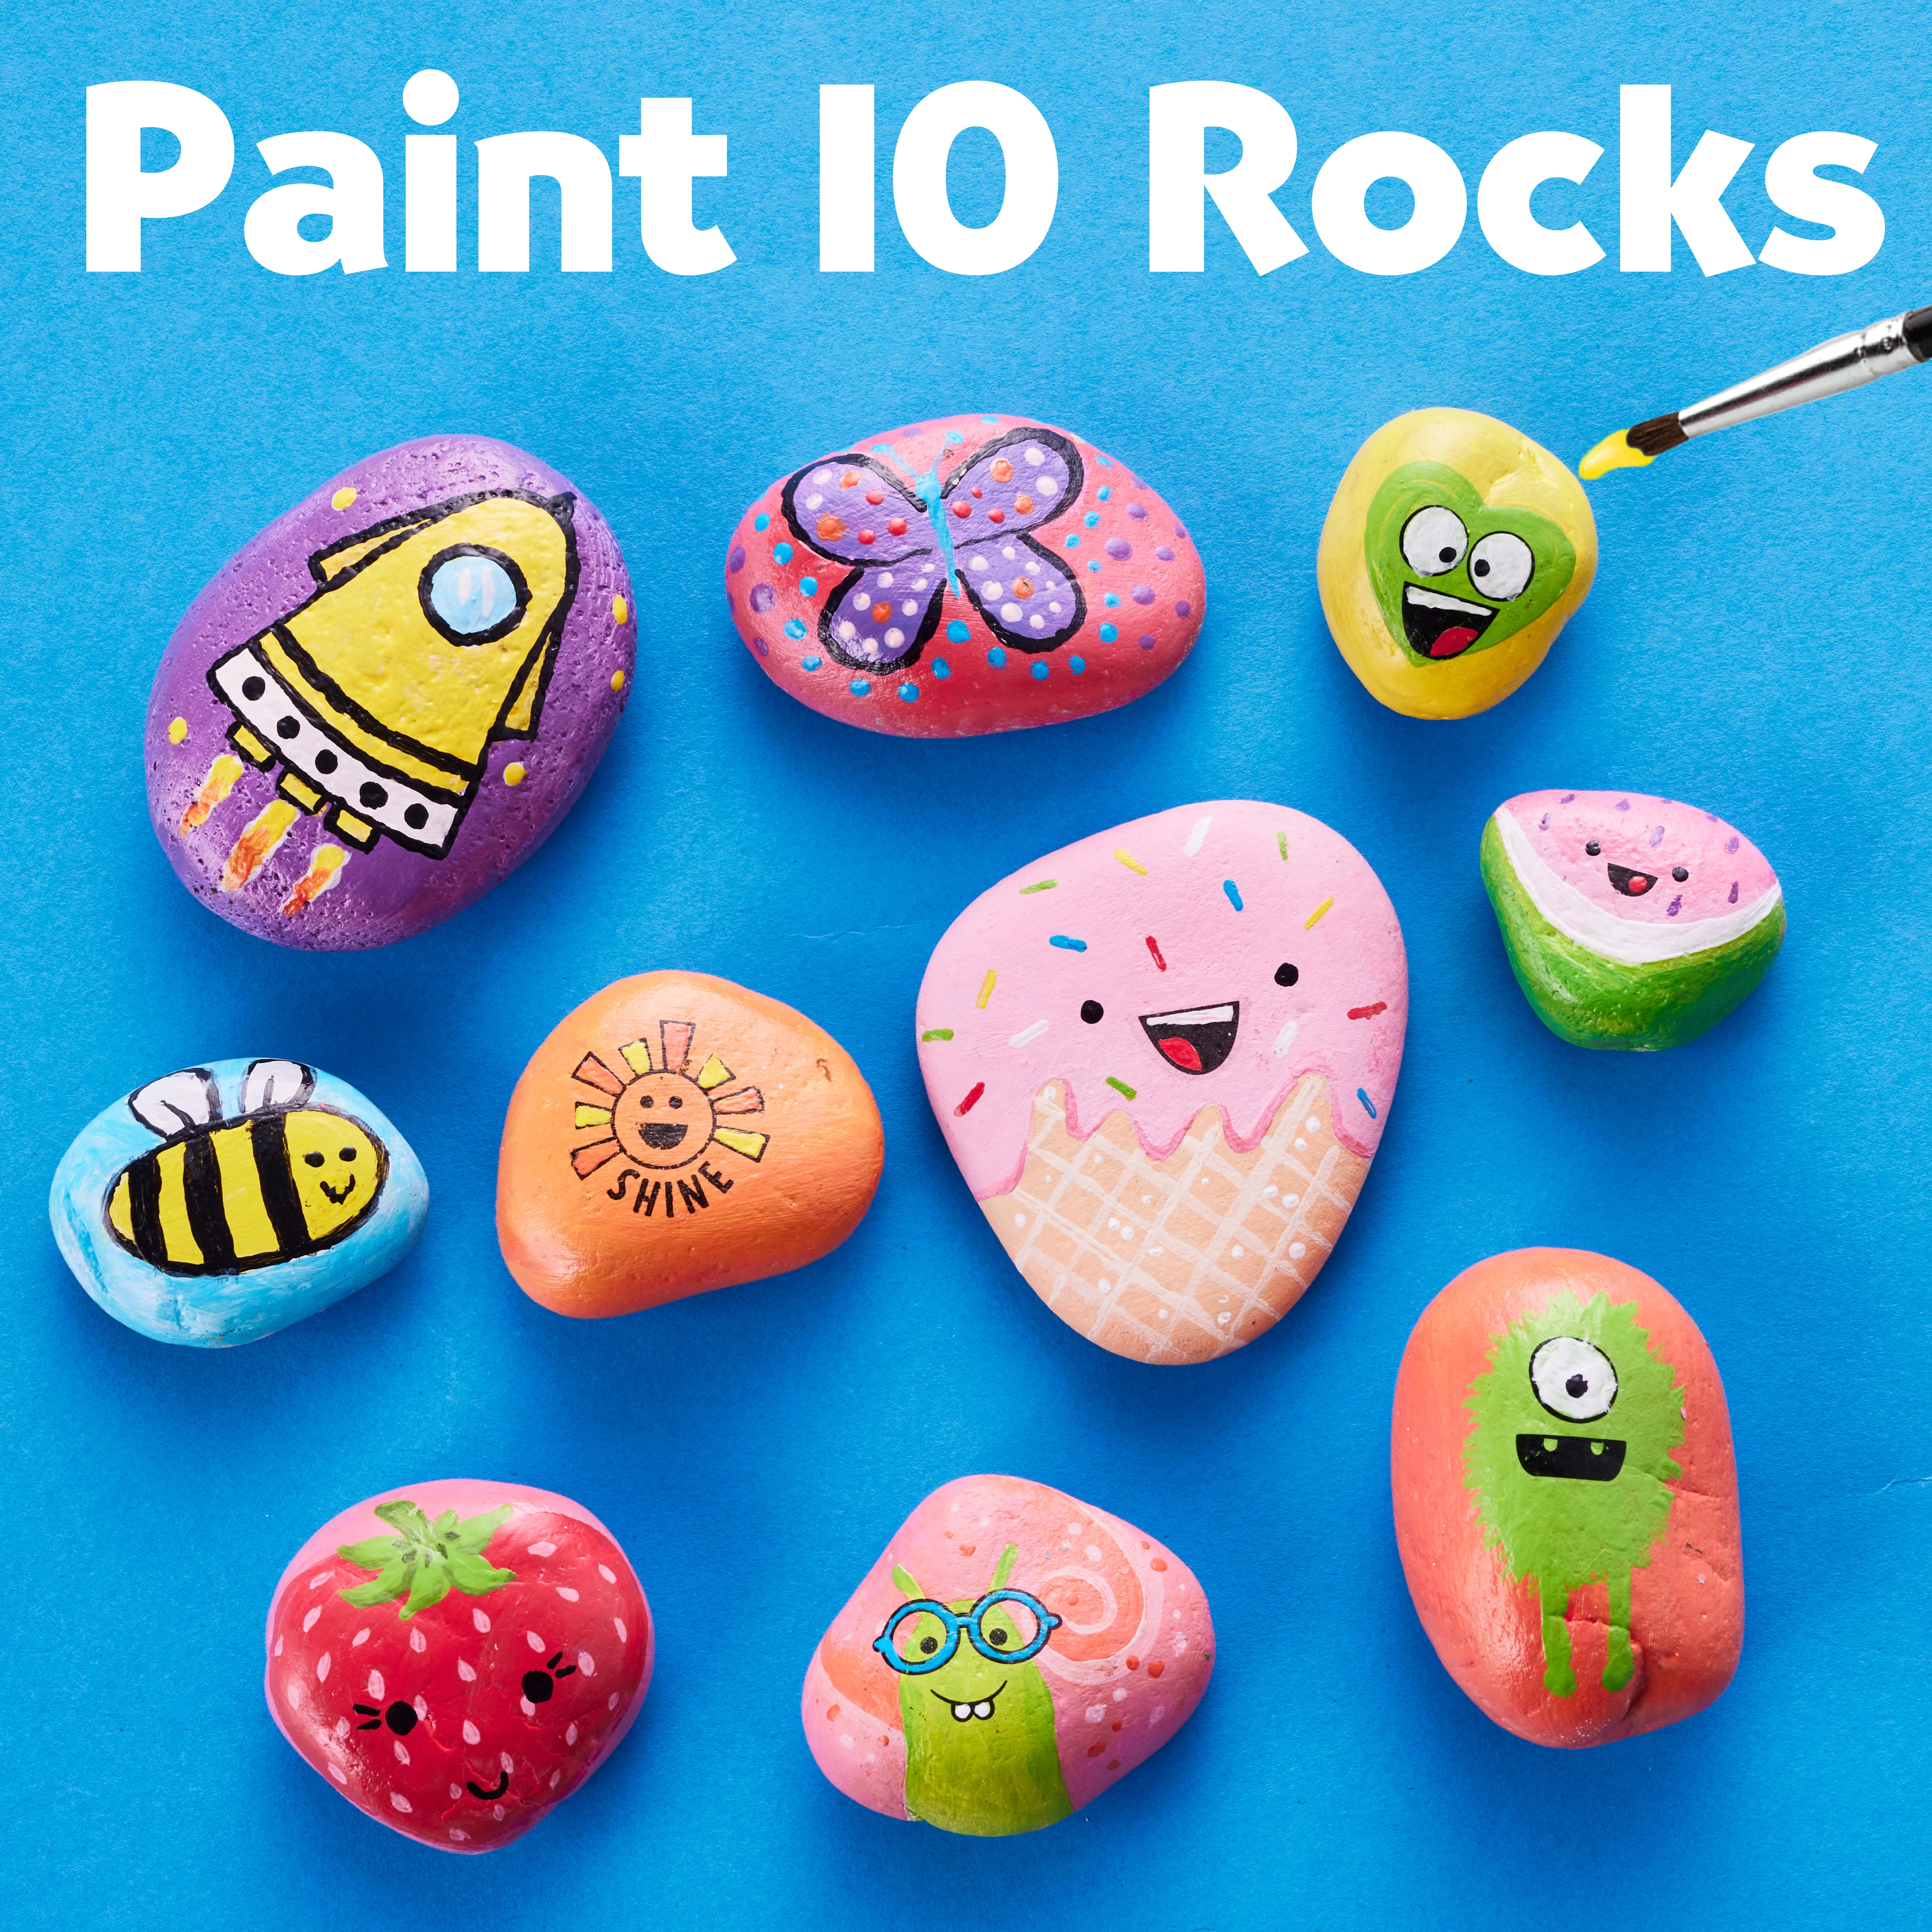 Dezzy's Workshop Rock Painting Kit for Kids - Arts & Crafts Supplies Set  for Girls & Boys Ages 6-12 - Educational Art Supplies for Painting Rocks,  Fun Toys & Games Ideas 